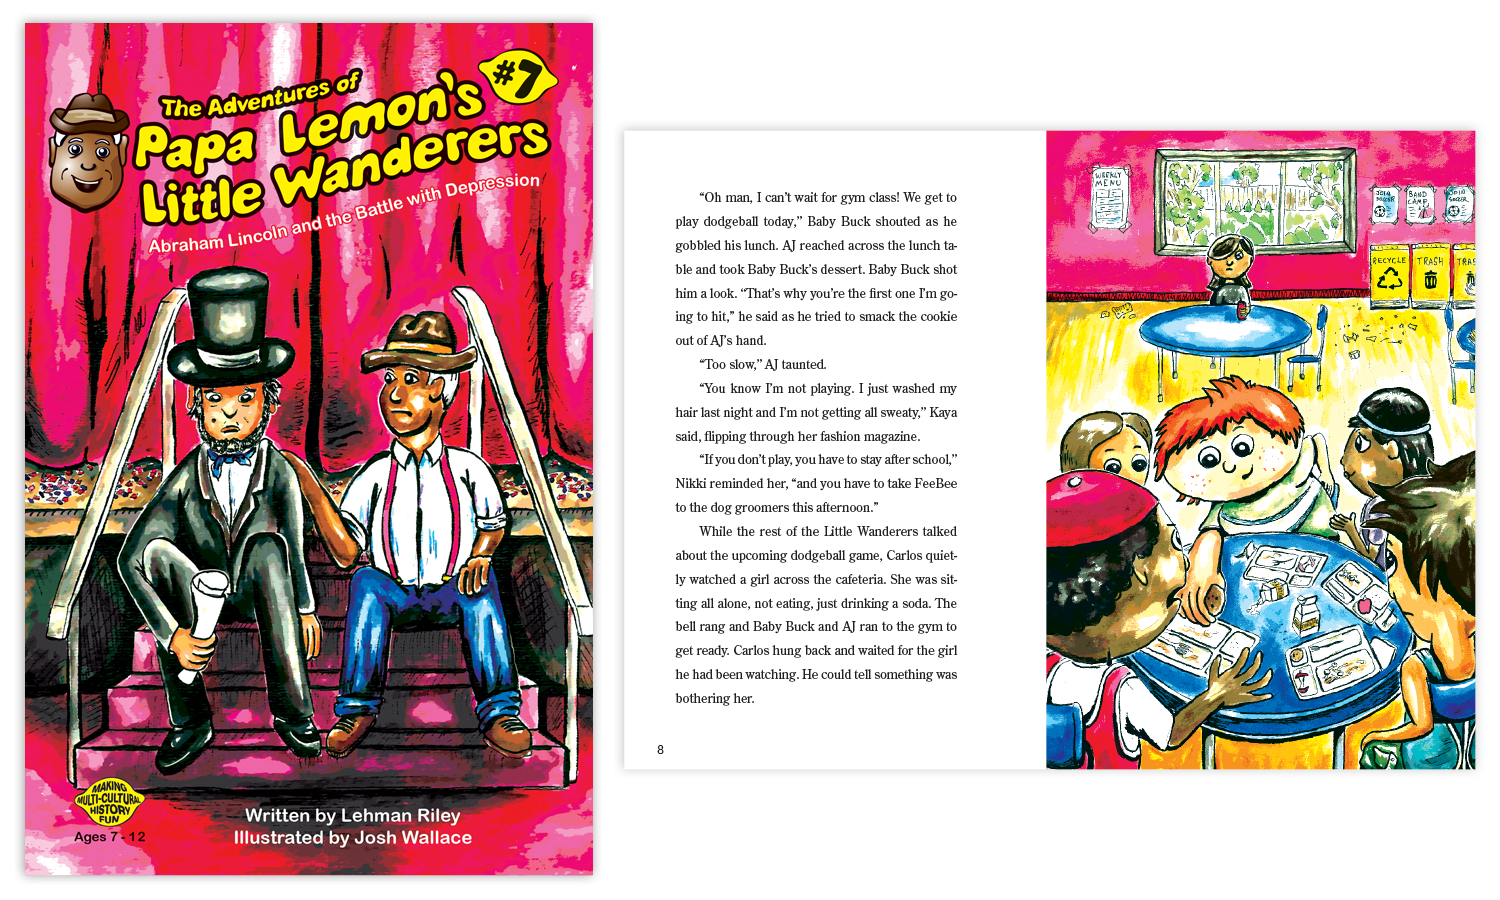 Twin Cities Childrens Book Illustrator Josh Wallace "The Adventures of Papa Lemon's Little Wanderers, Book 7: Abraham Lincoln and the Battle with Depression"